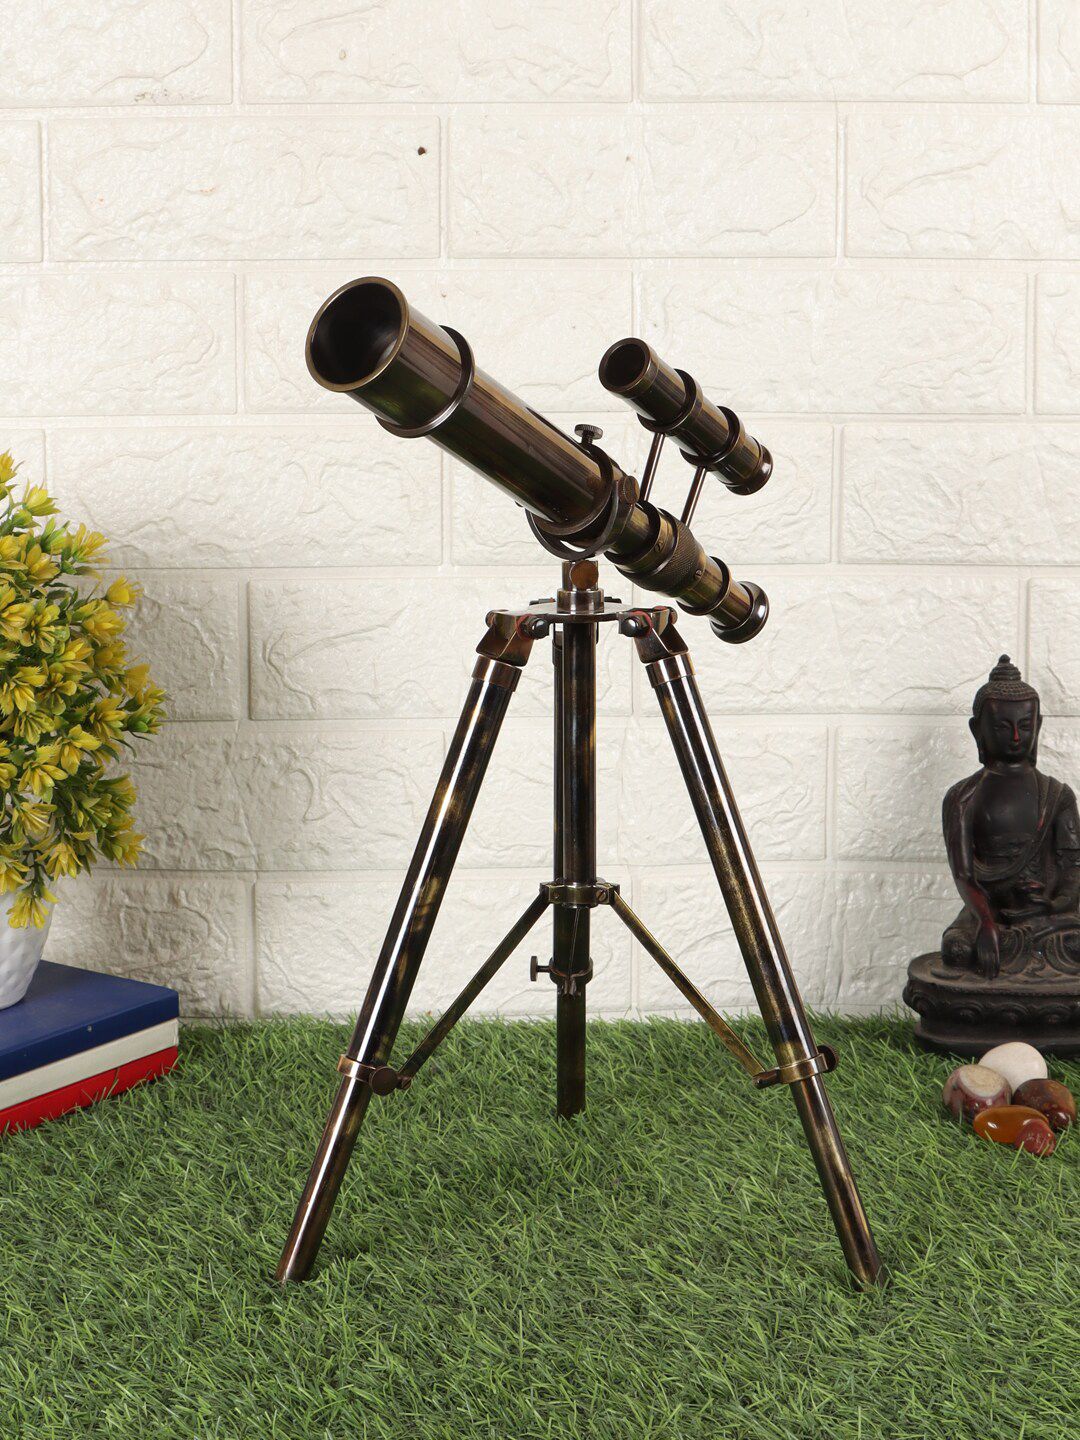 EXIM DECOR Rust-Coloured Antique Brass Double Barell Telescope Showpiece With Tripod Stand Price in India